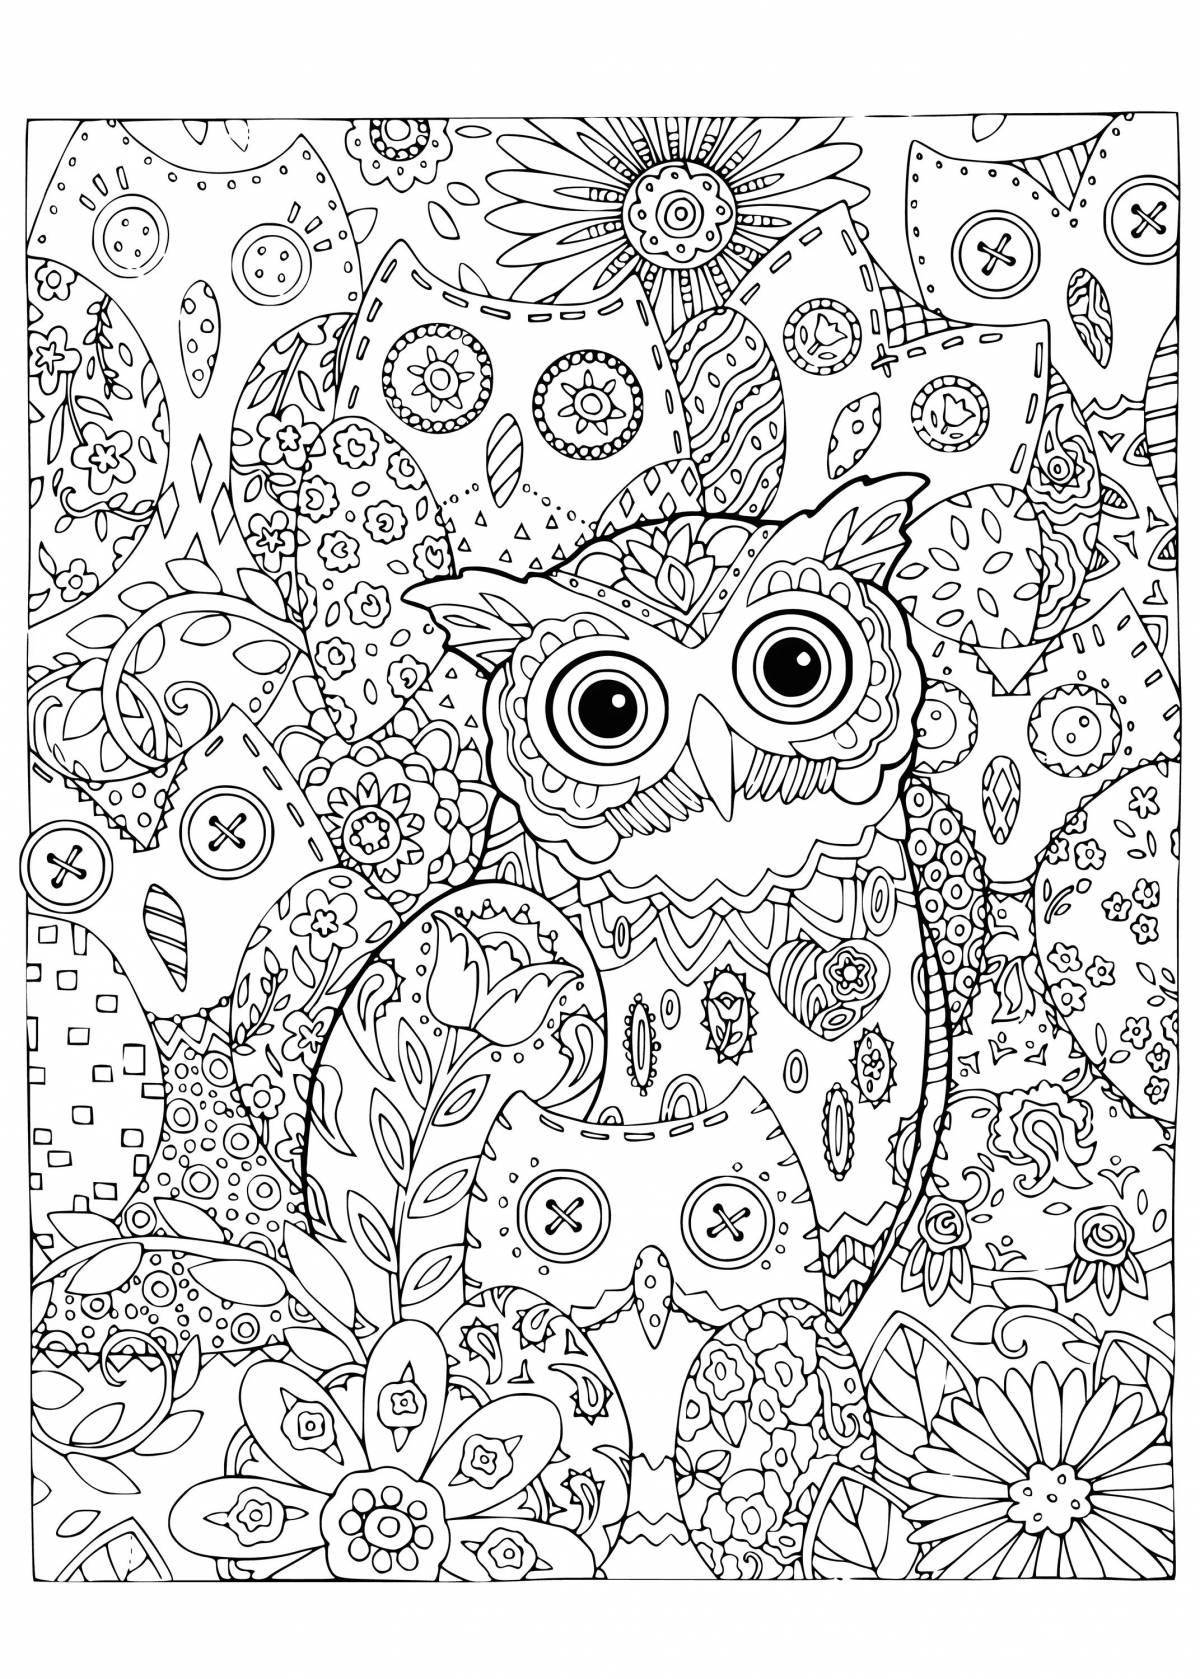 Luminous anti-stress coloring book for adults